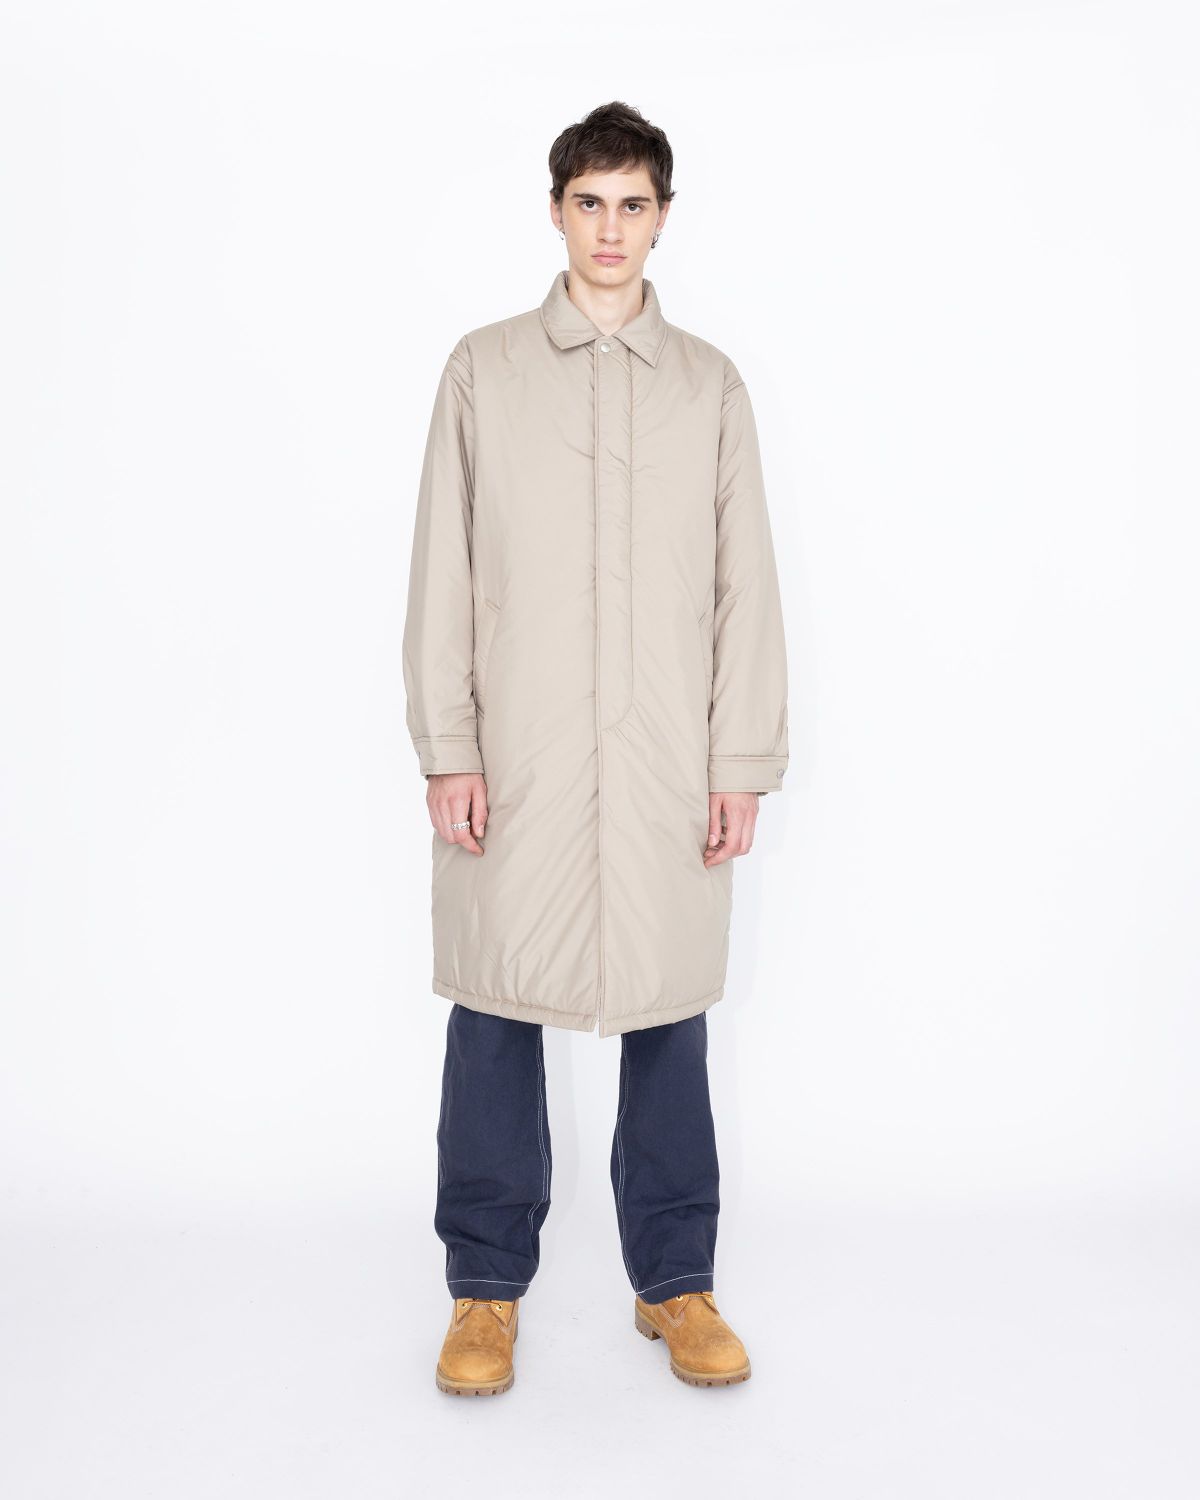 Highsnobiety HS05 – Light Insulated Eco-Poly Trench Coat Beige - Outerwear - Beige - Image 4